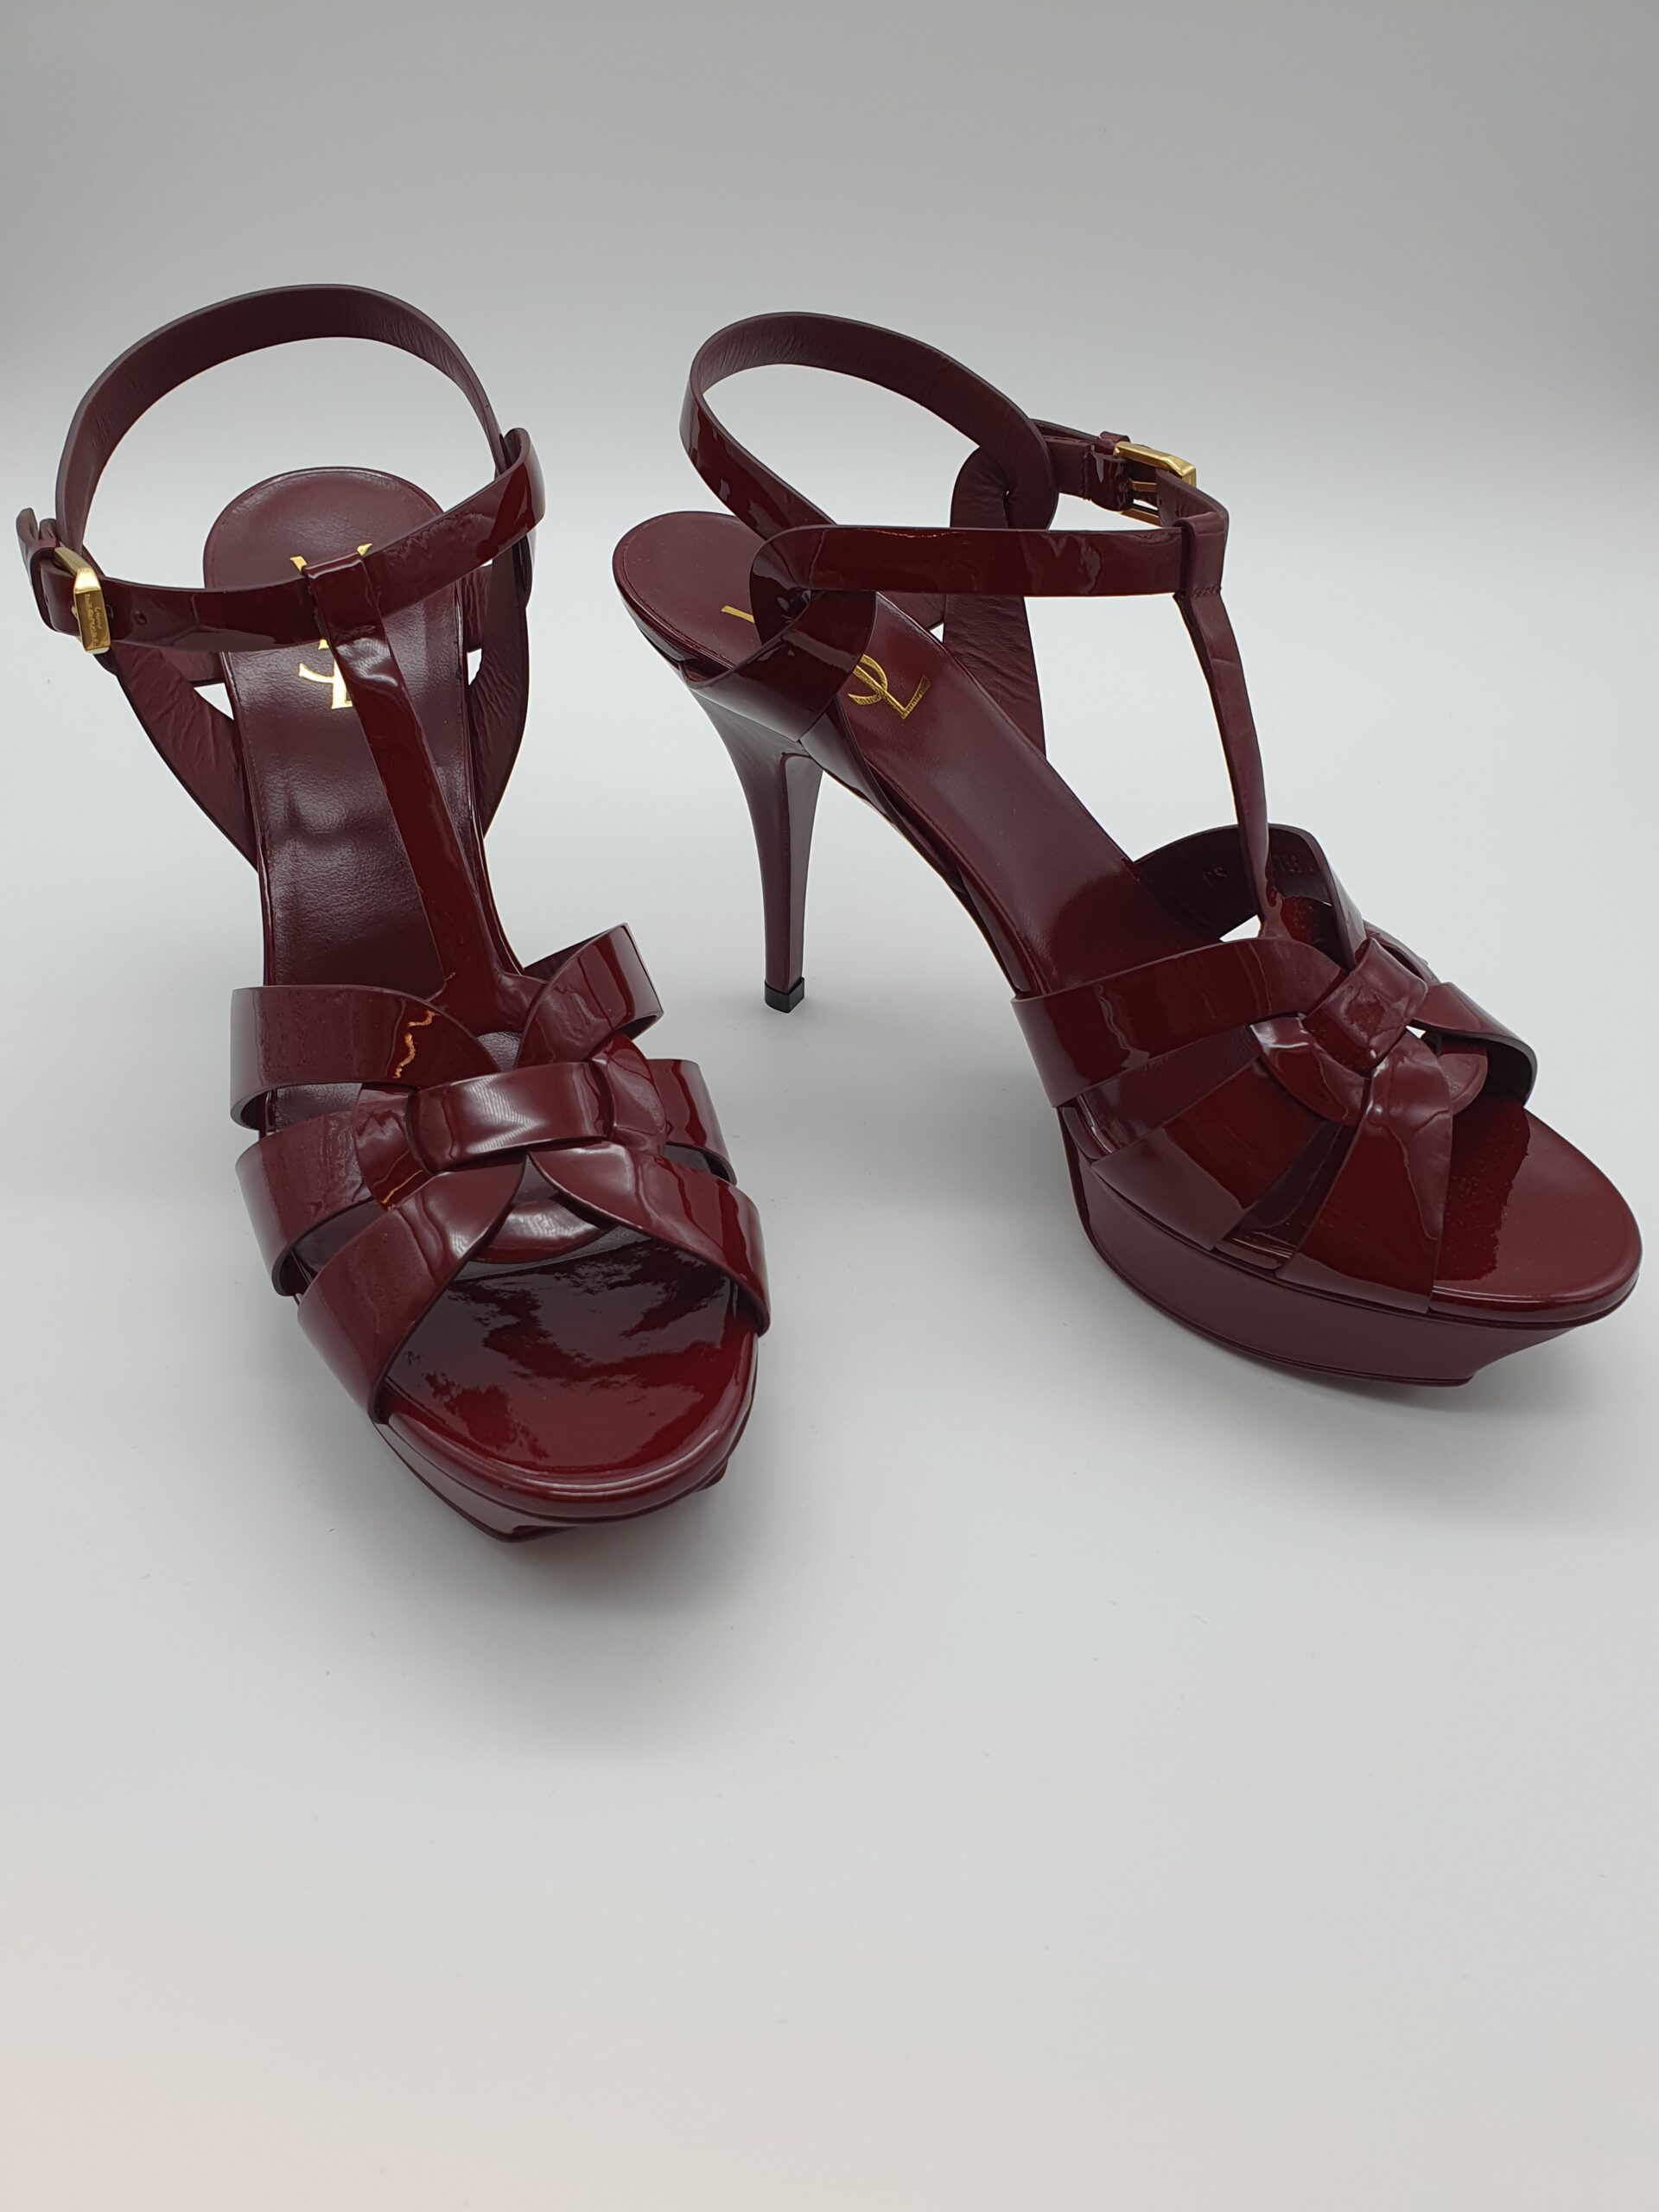 TRIBUTE PLATFORM SANDALS IN PATENT LEATHER IN French Burgundy – BRANDS ...